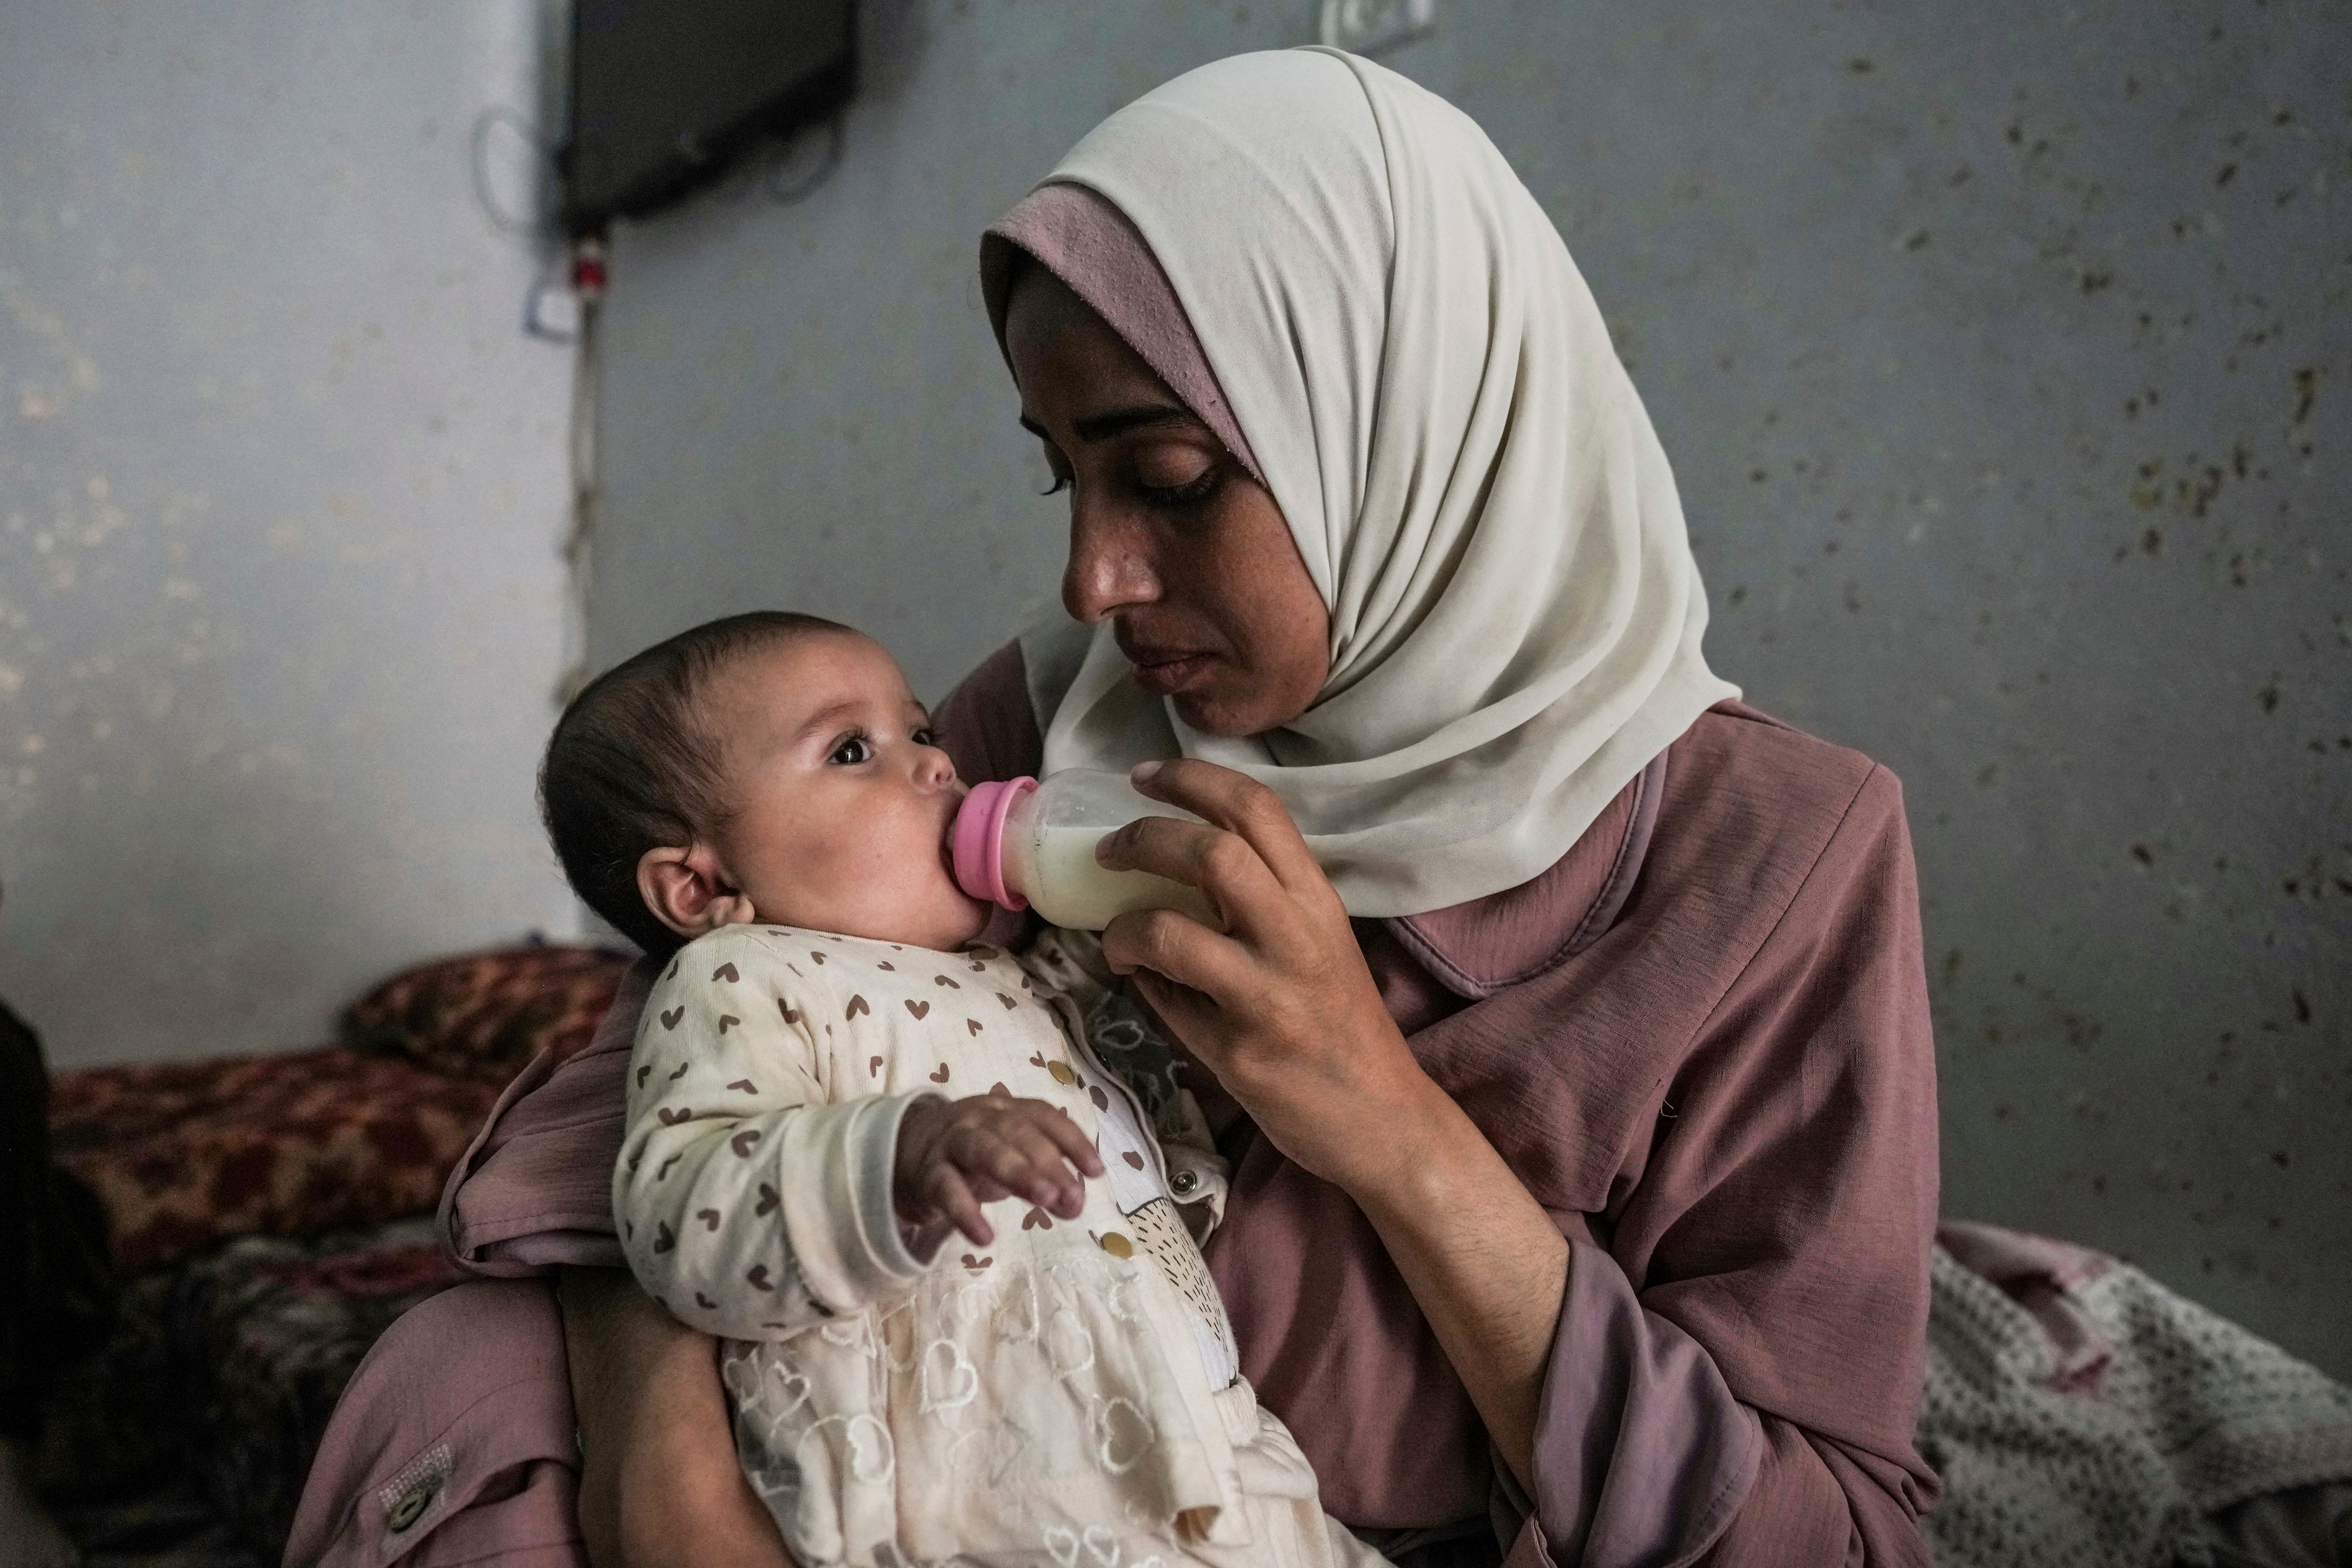 A mother, displaced by the Israeli attacks, feeds her baby in Nuseirat, a refugee camp in Gaza